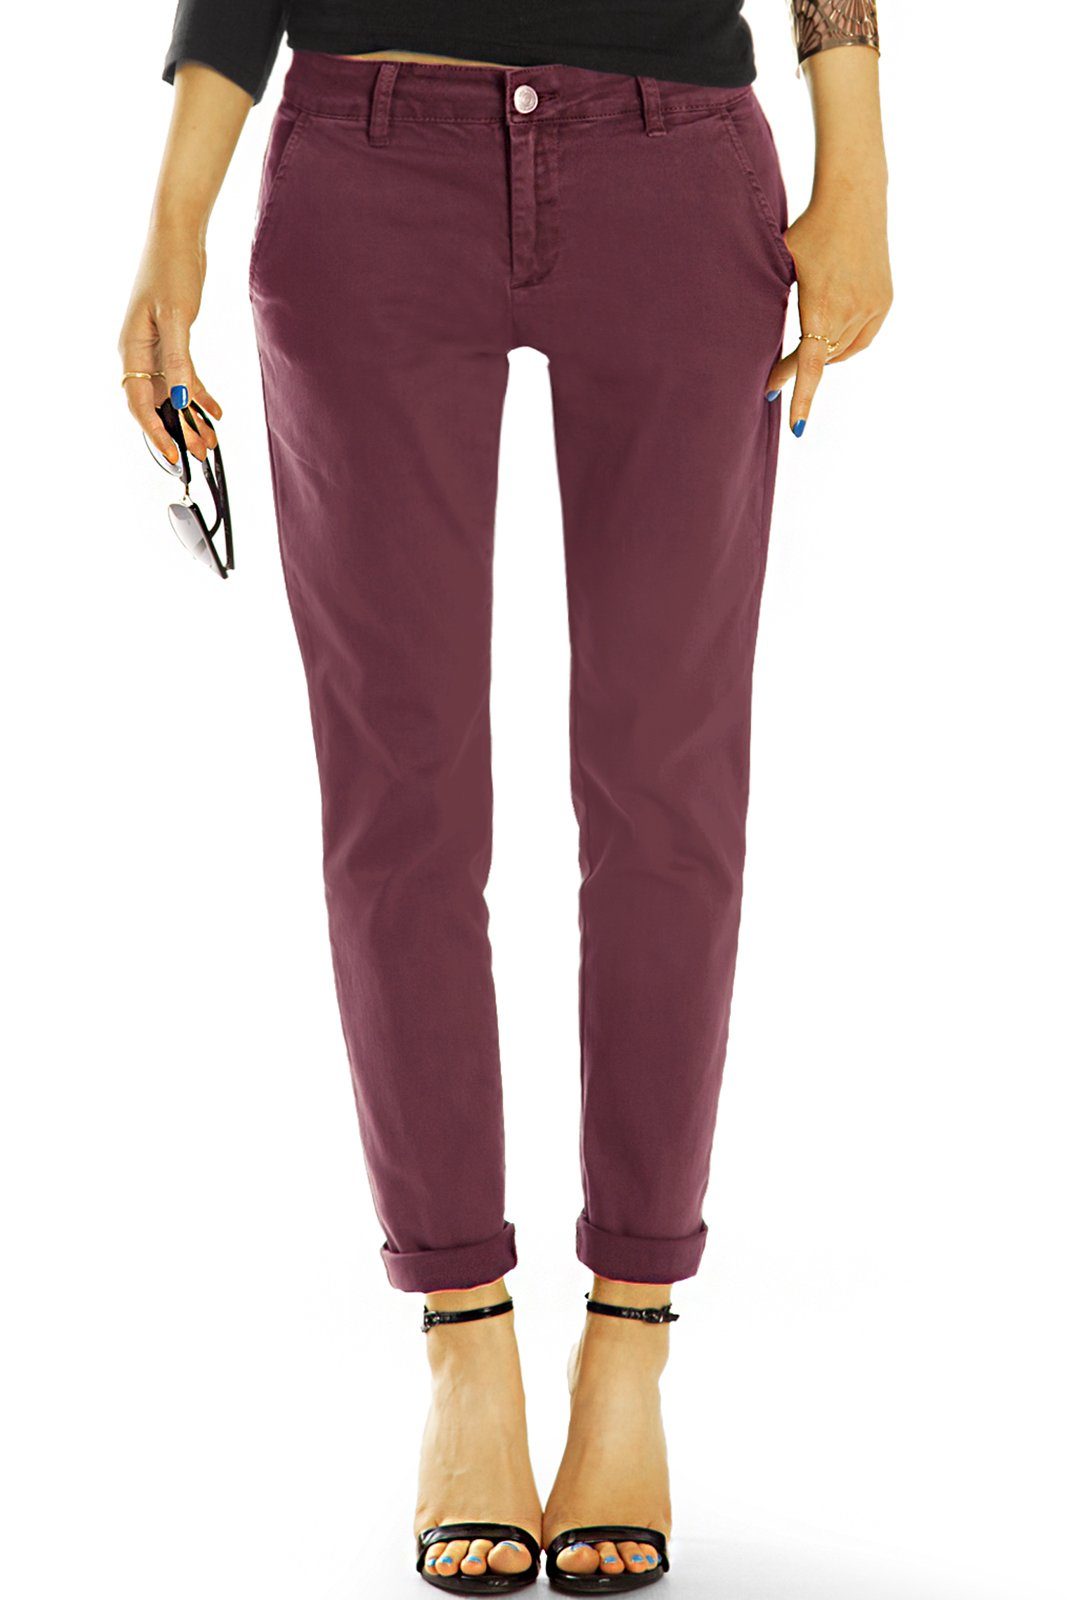 be styled Chinos relaxed fit Damenhosen, chinohosen mit stretch j17e bordeaux | Stretchhosen